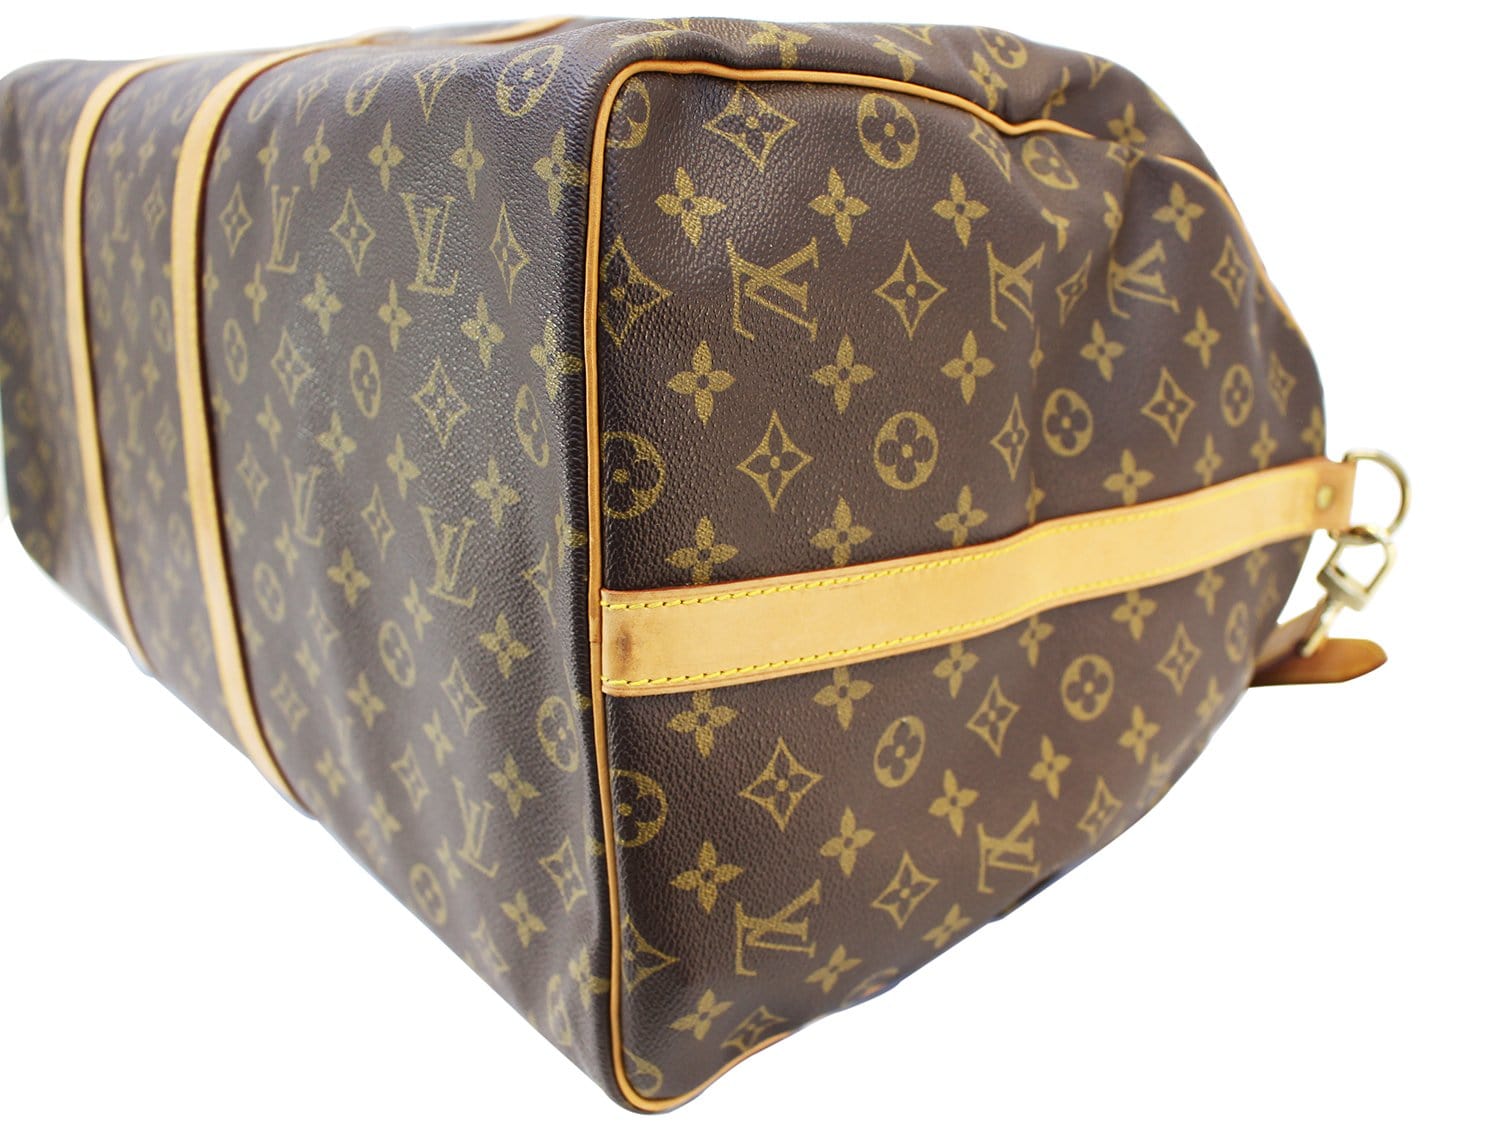 LOUIS VUITTON Keepall 60 bag in monogram canvas and nat…